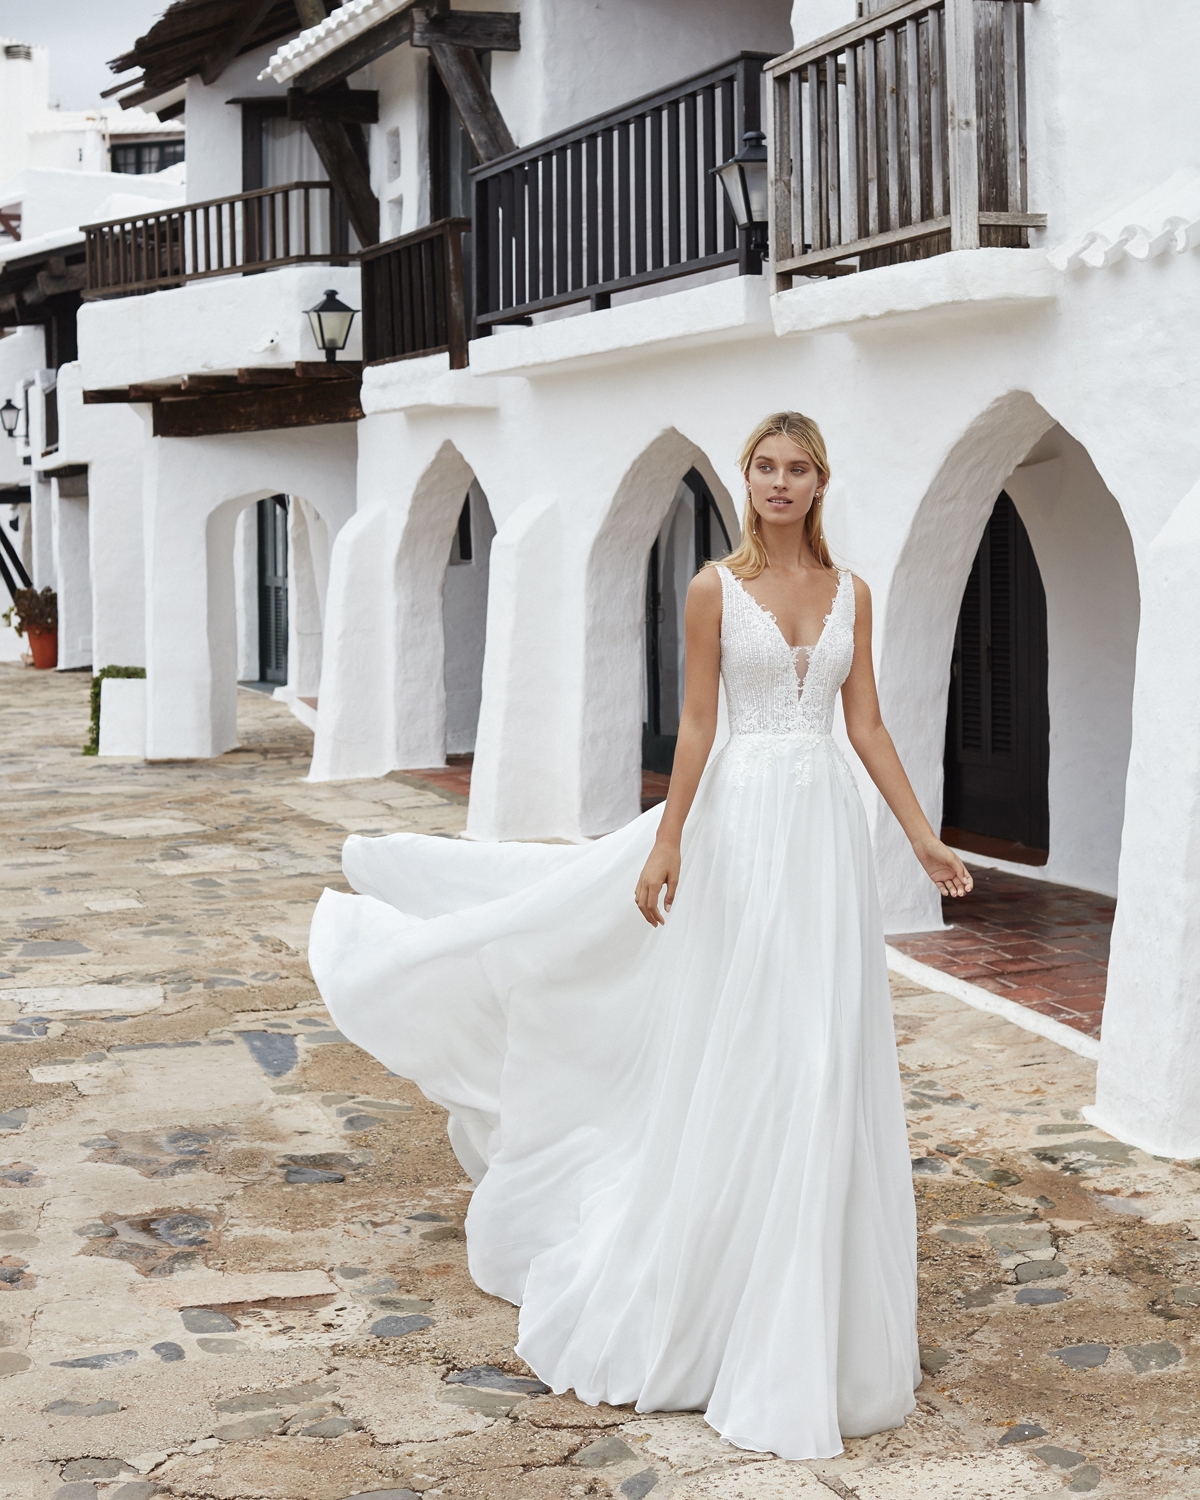 Amazing Wedding Dresses Inverness in the world Learn more here 